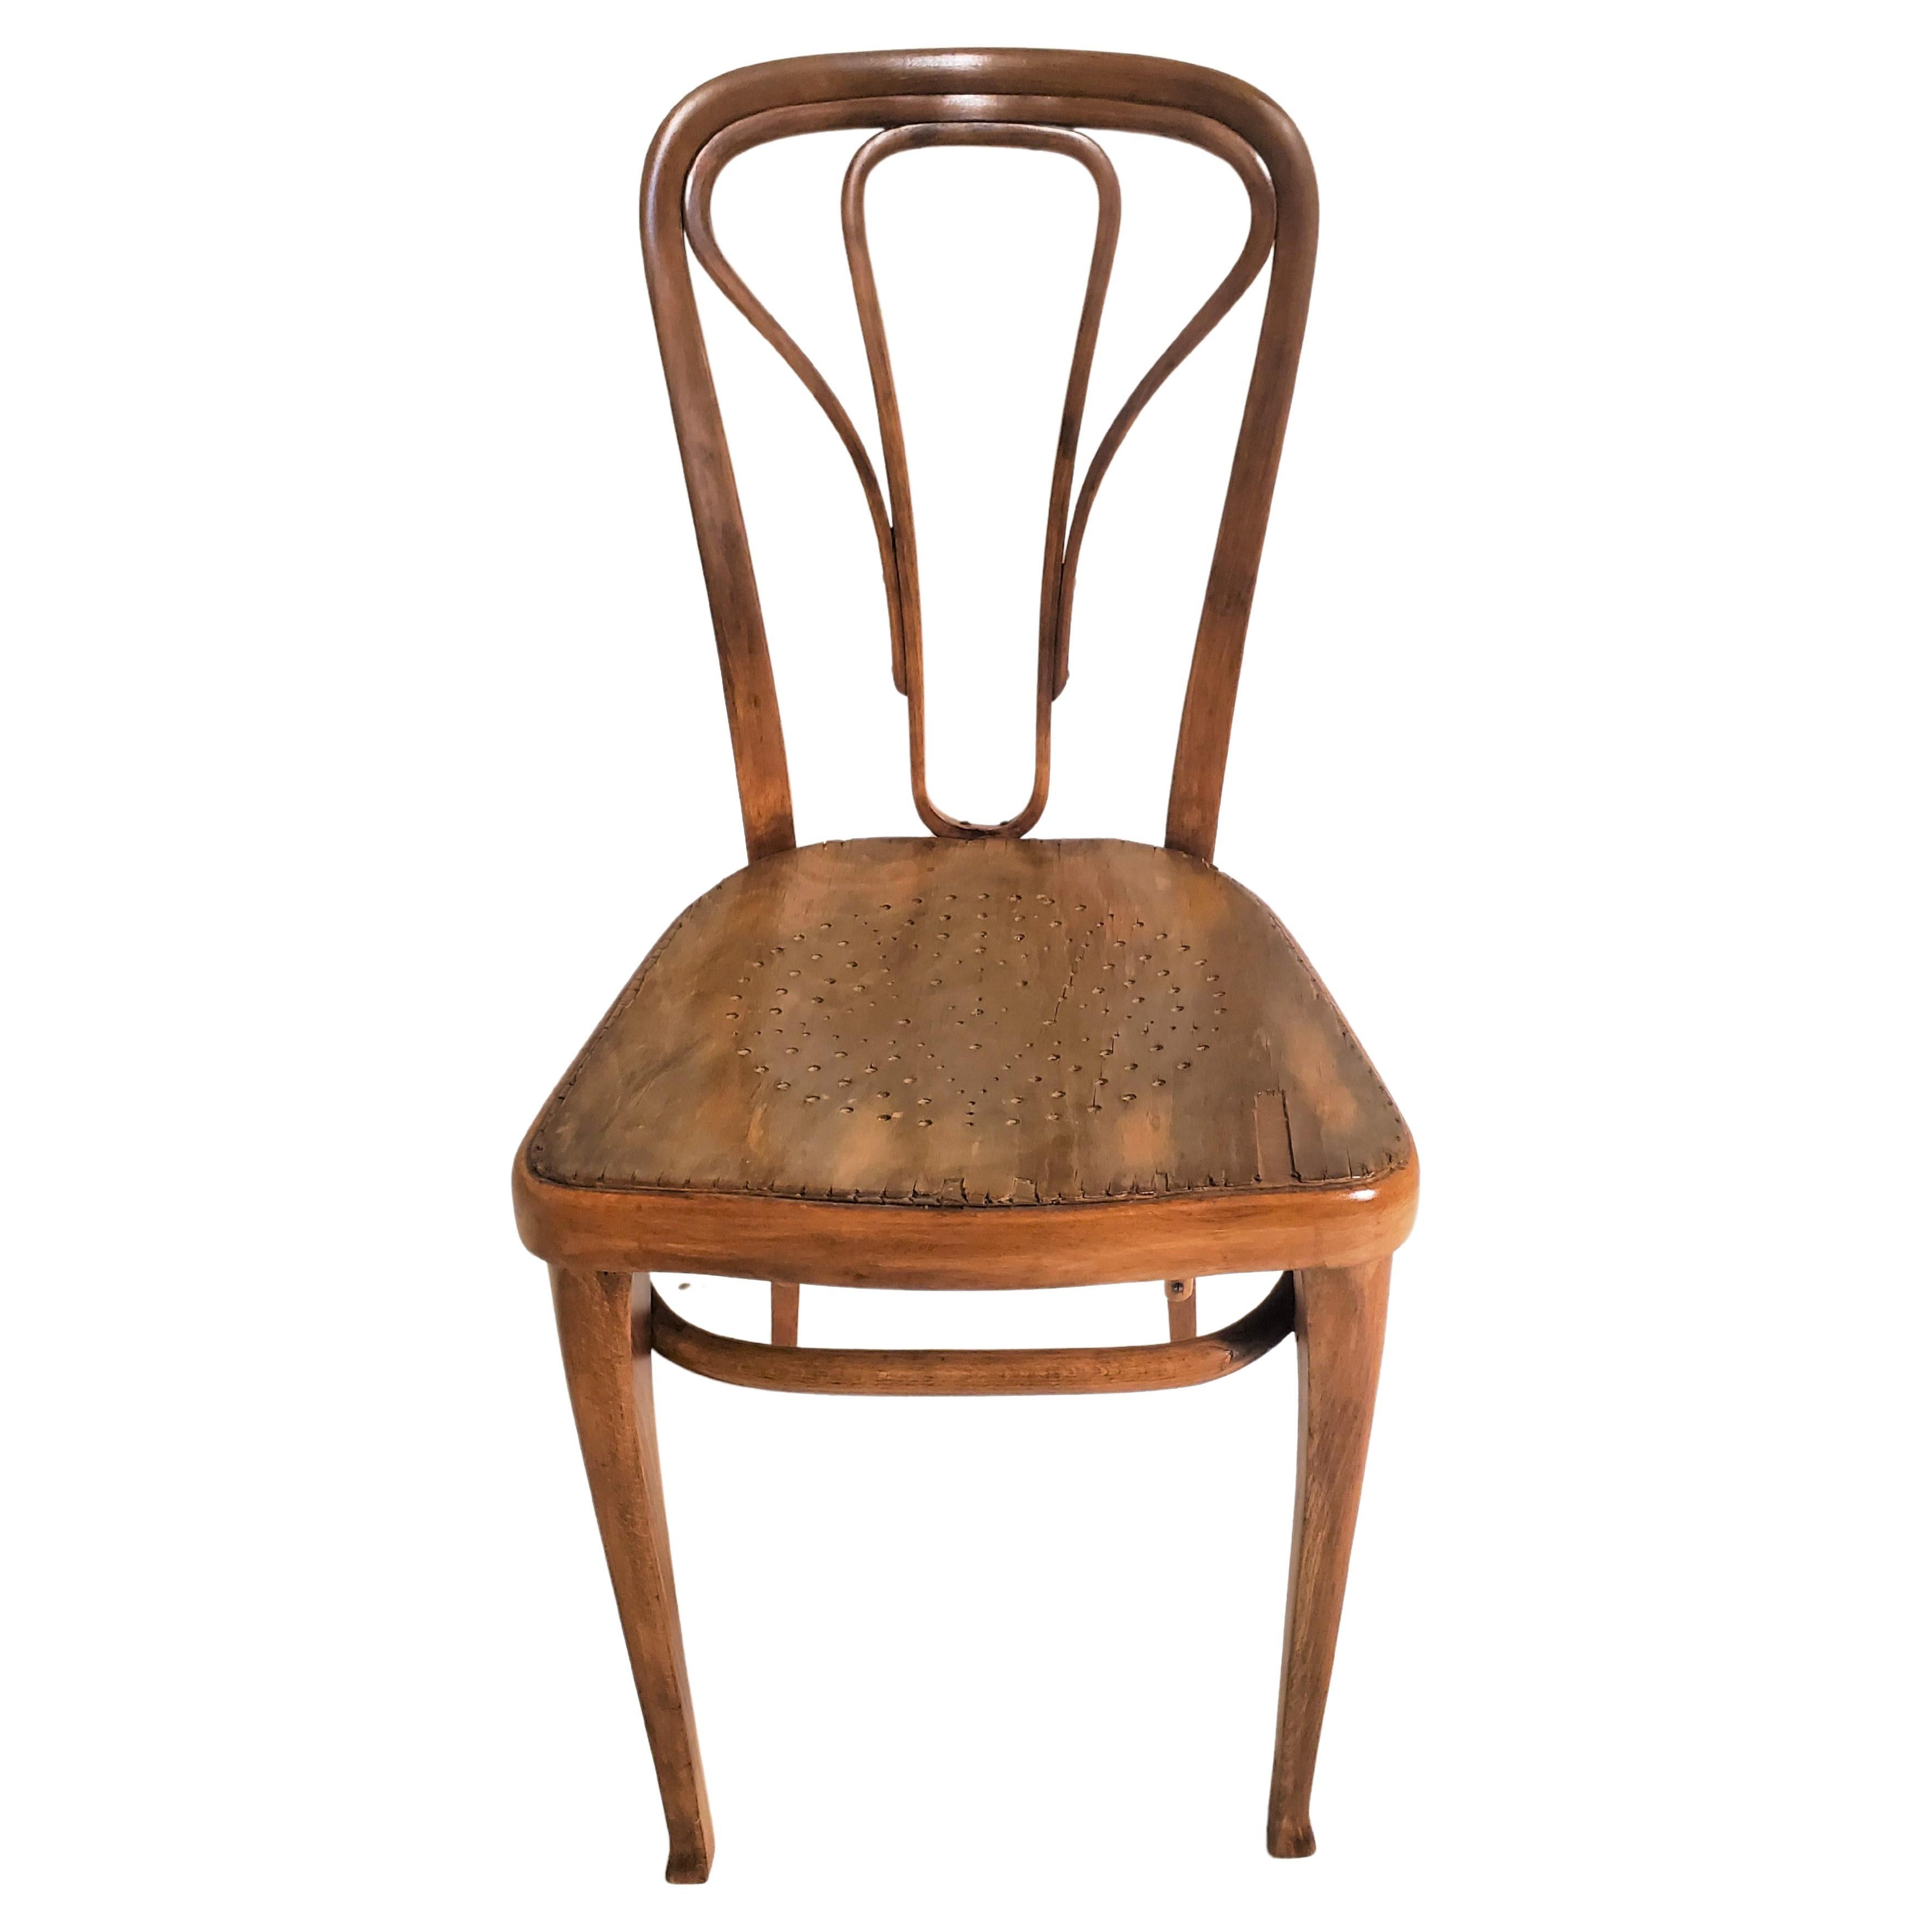 An original Wiener Werkstätte bentwood wood bistro chair by Thonet 
1870-1956. This authentic and elegant Austrian chair feature sinuous steamed wood in an organic style with Bauhaus, Vienna Secession details. 
Double curved back design extends